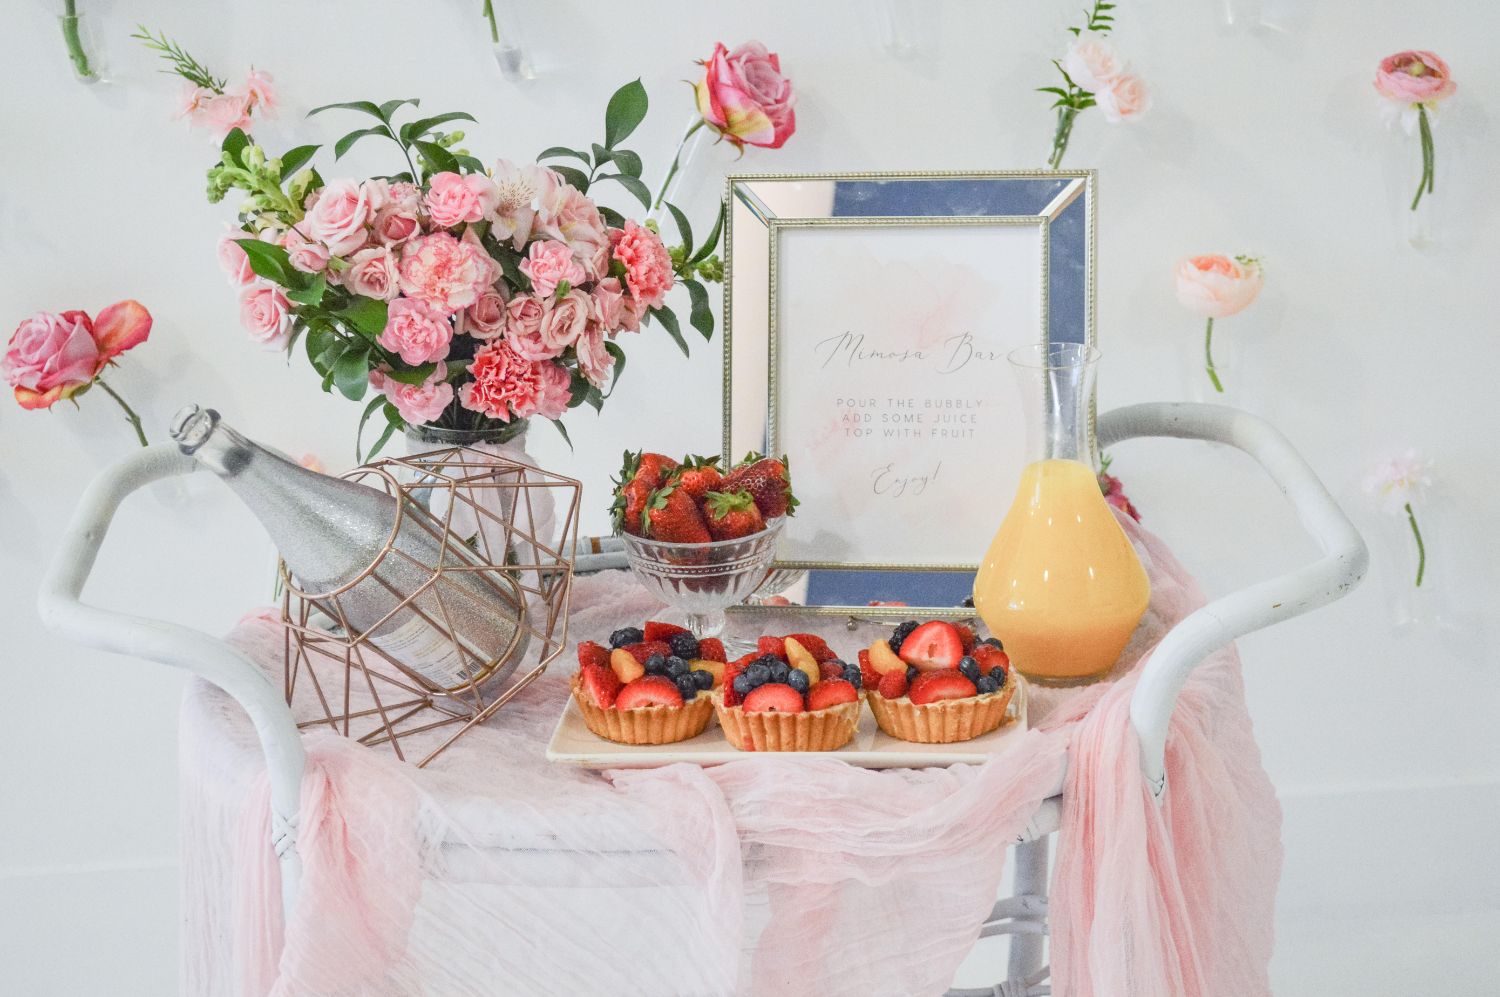 https://onestylishparty.com/wp-content/uploads/2021/05/floral-mothers-day-mimosa-bar.jpg